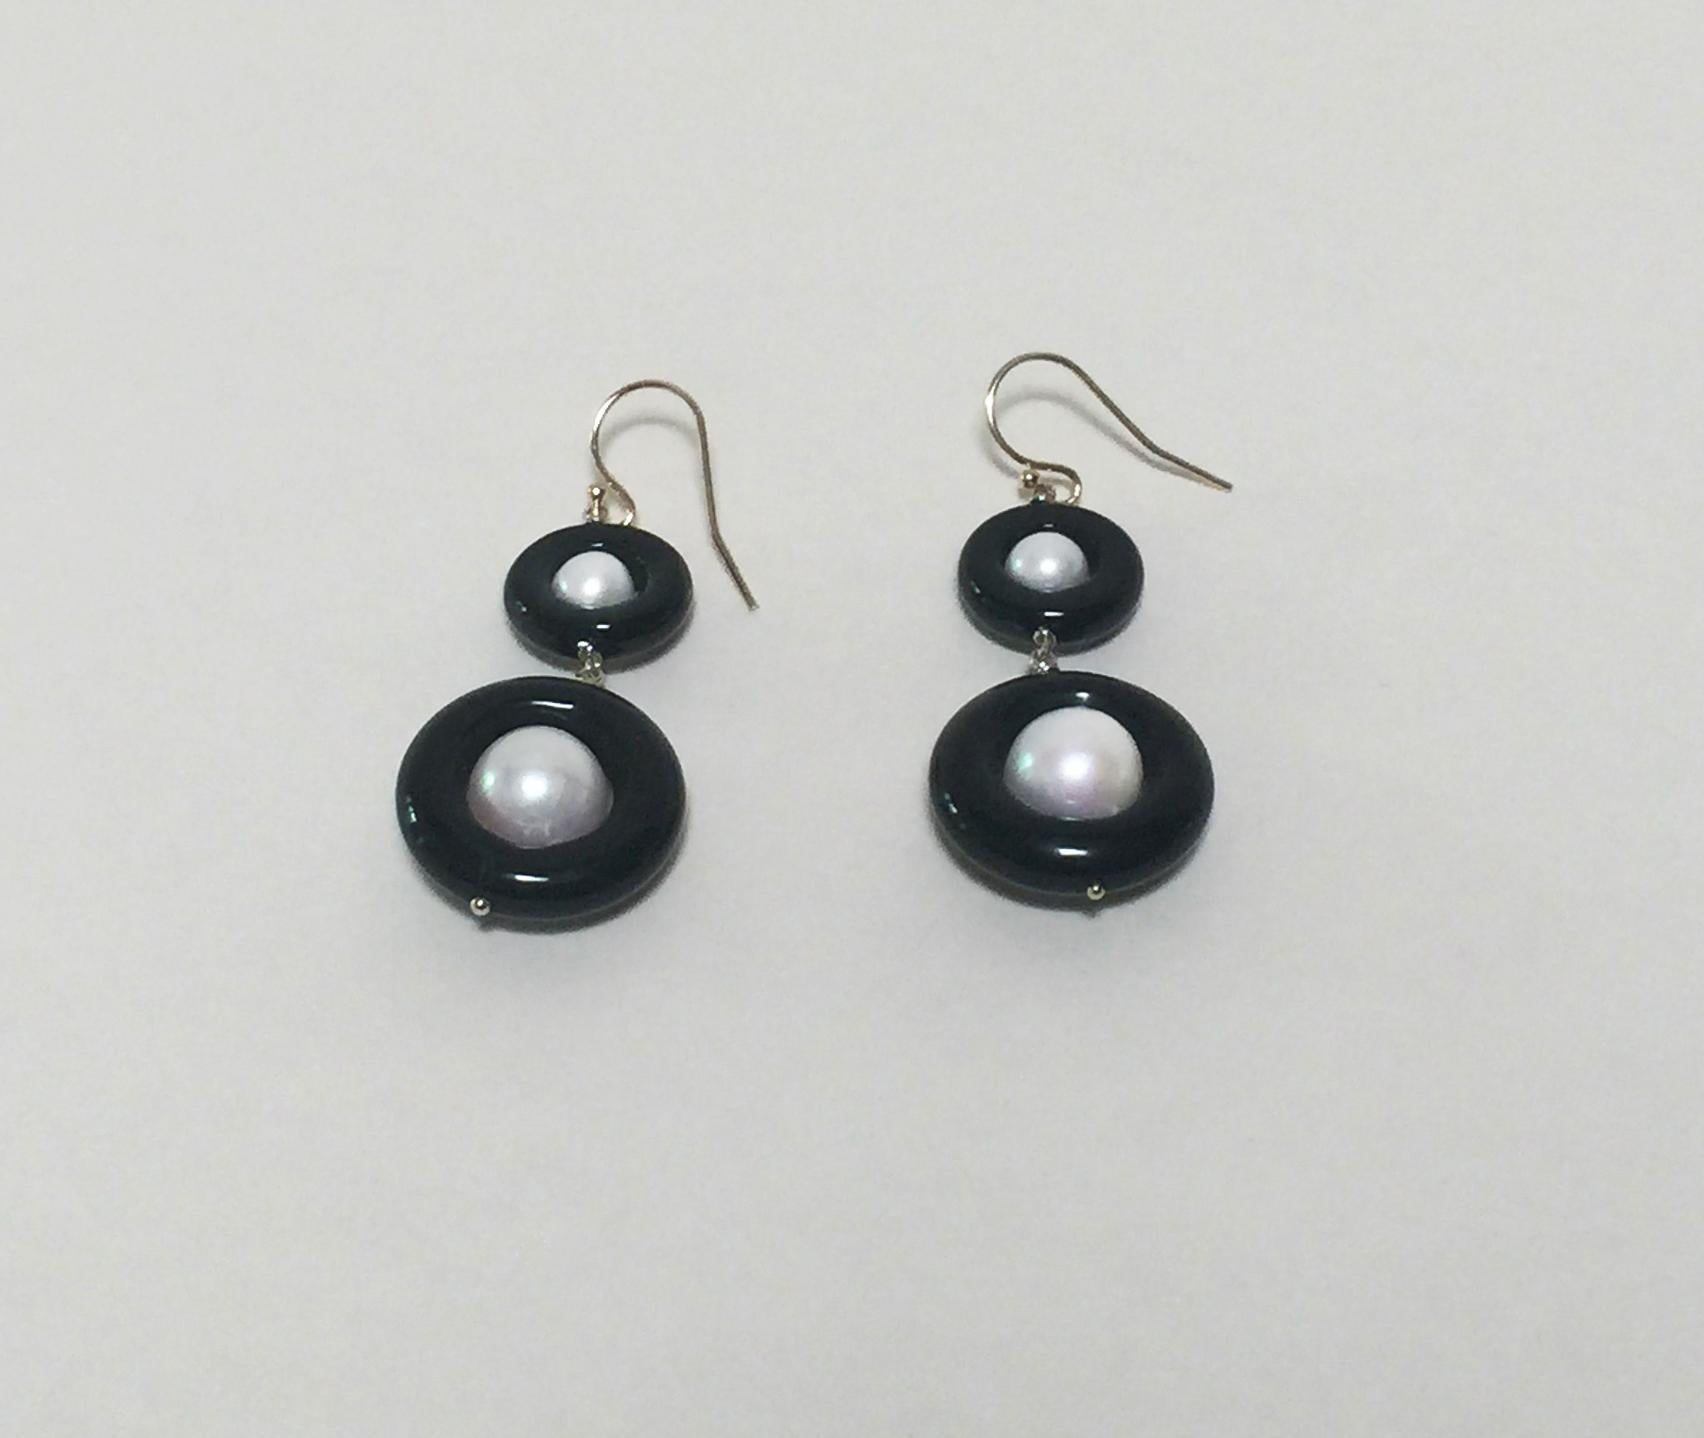 Artist Double Black Onyx and Pearl Earrings with 14 Karat Yellow Gold Hook and Wiring